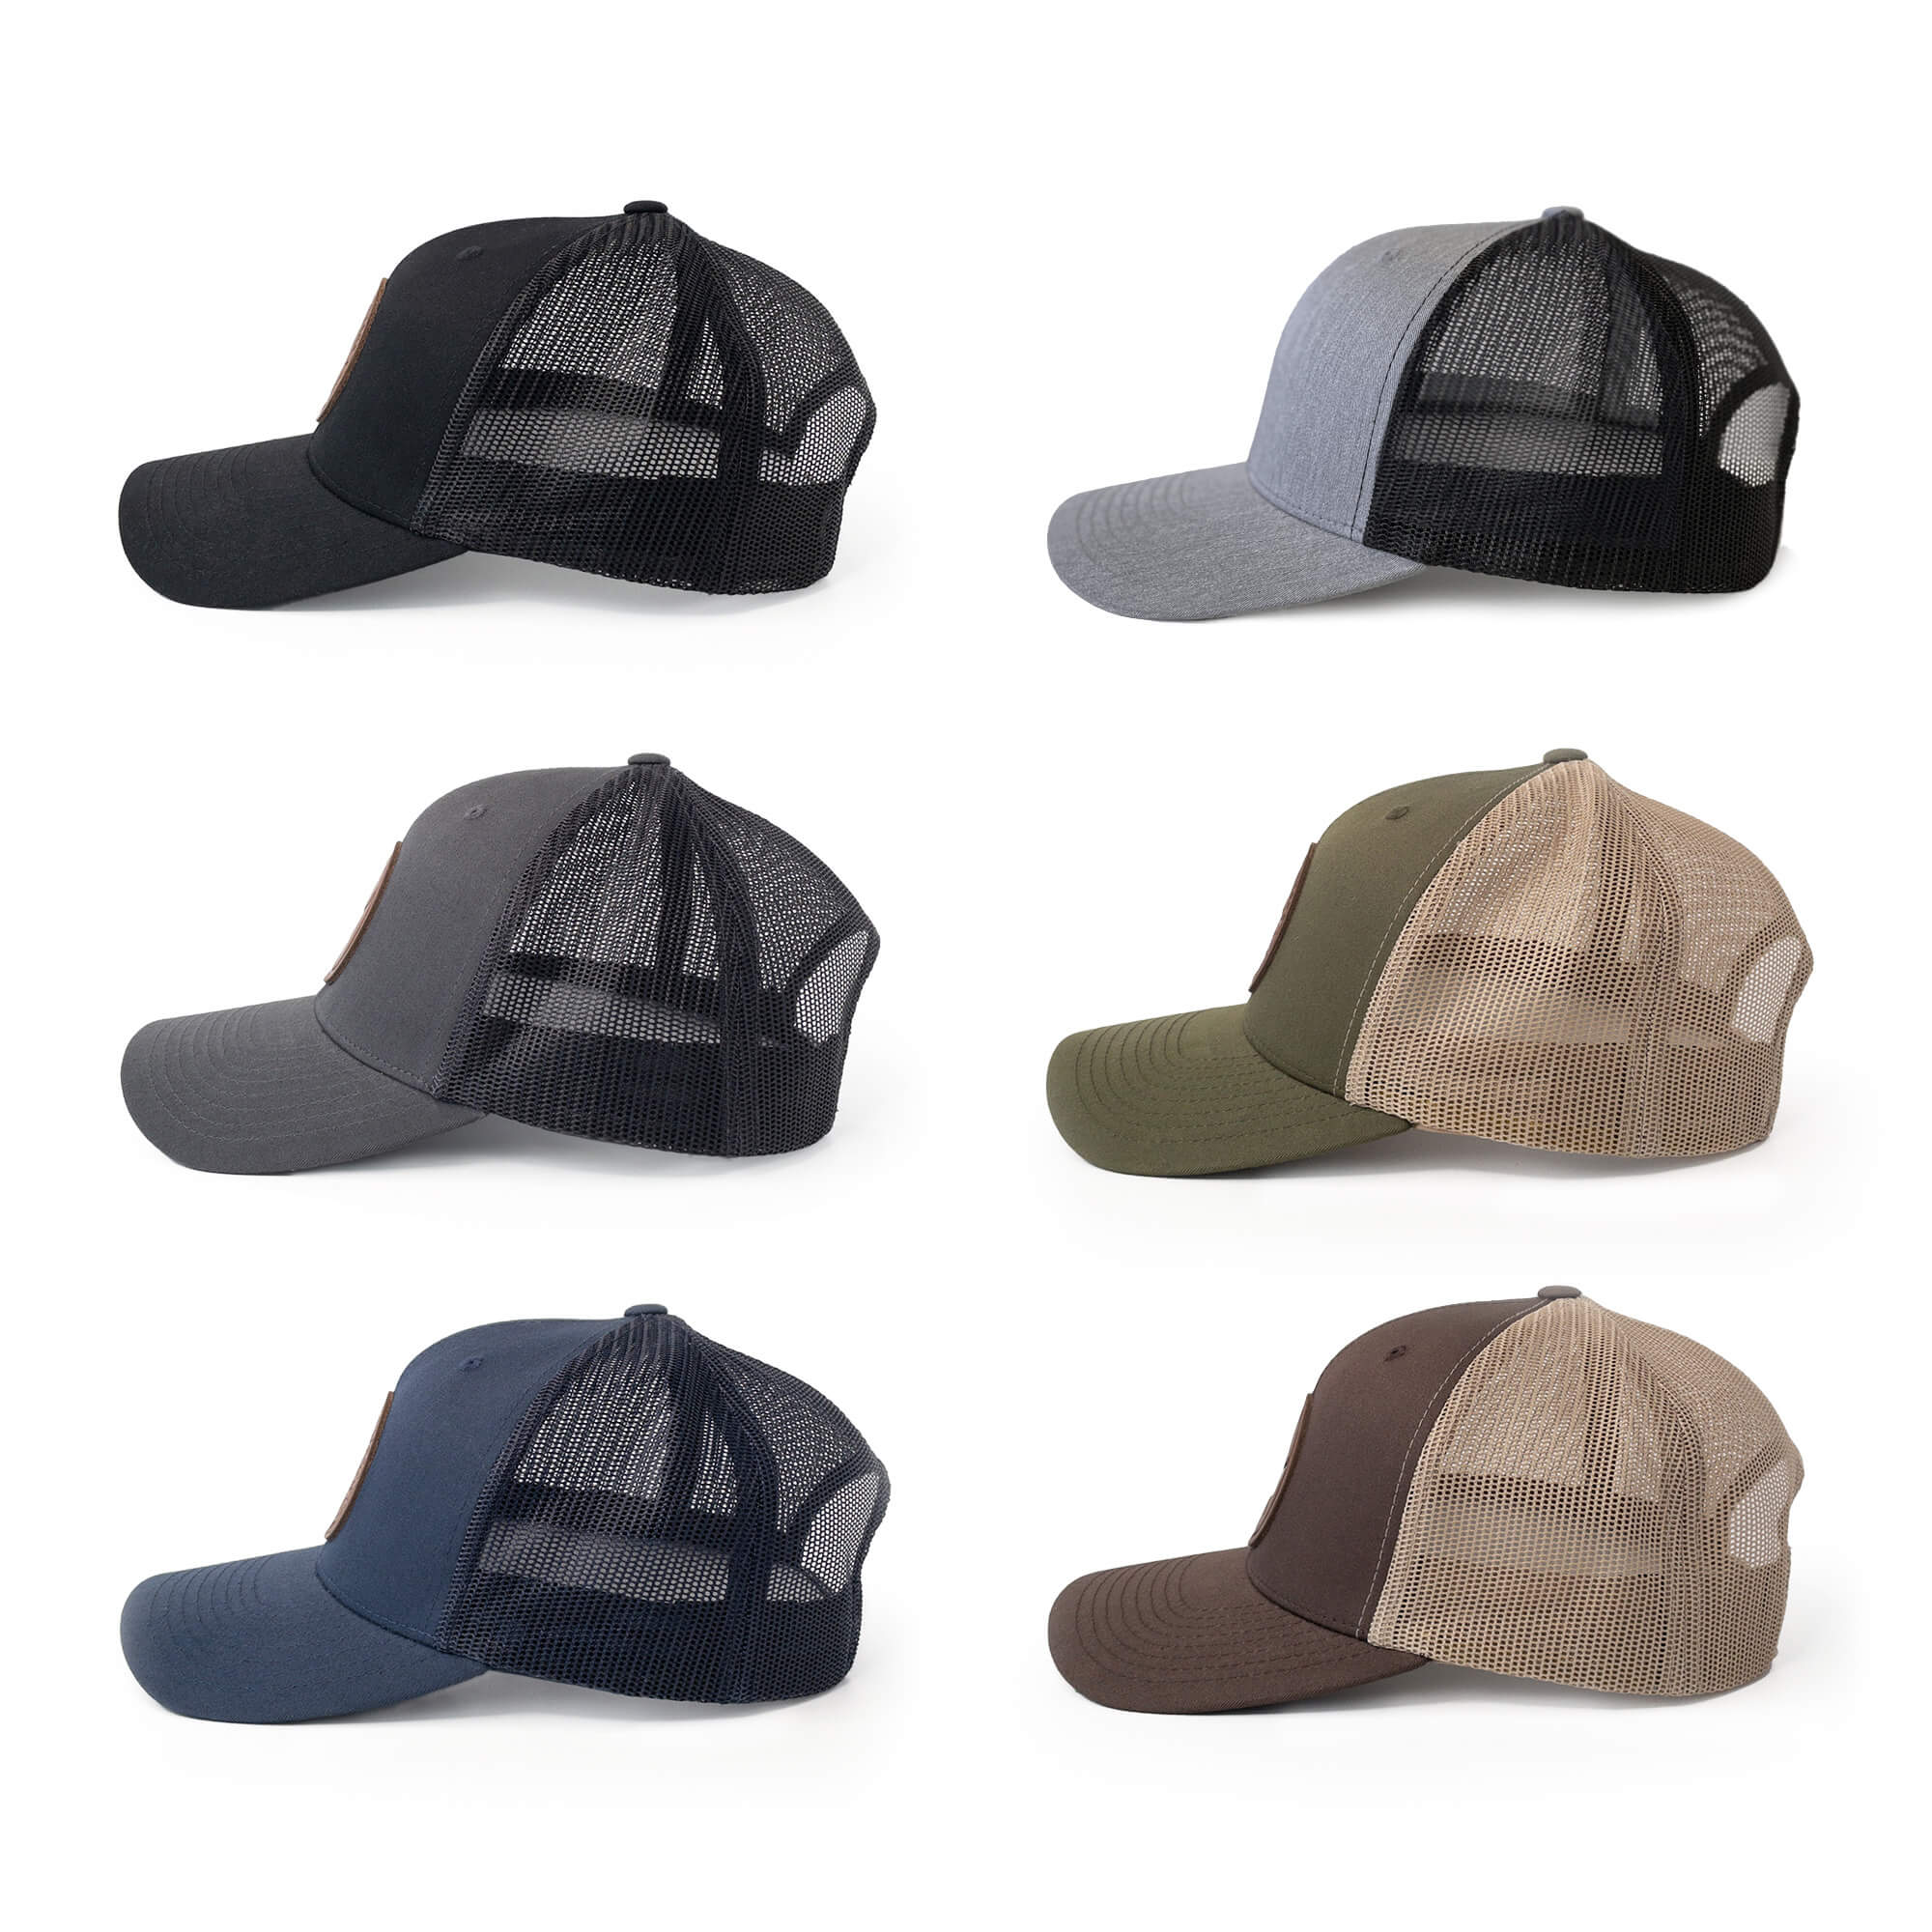 Leather patch trucker hats available in 6 colors | BLACK-003-005, CHARC-003-005, NAVY-003-005, HGREY-003-005, MOSS-003-005, BROWN-003-005